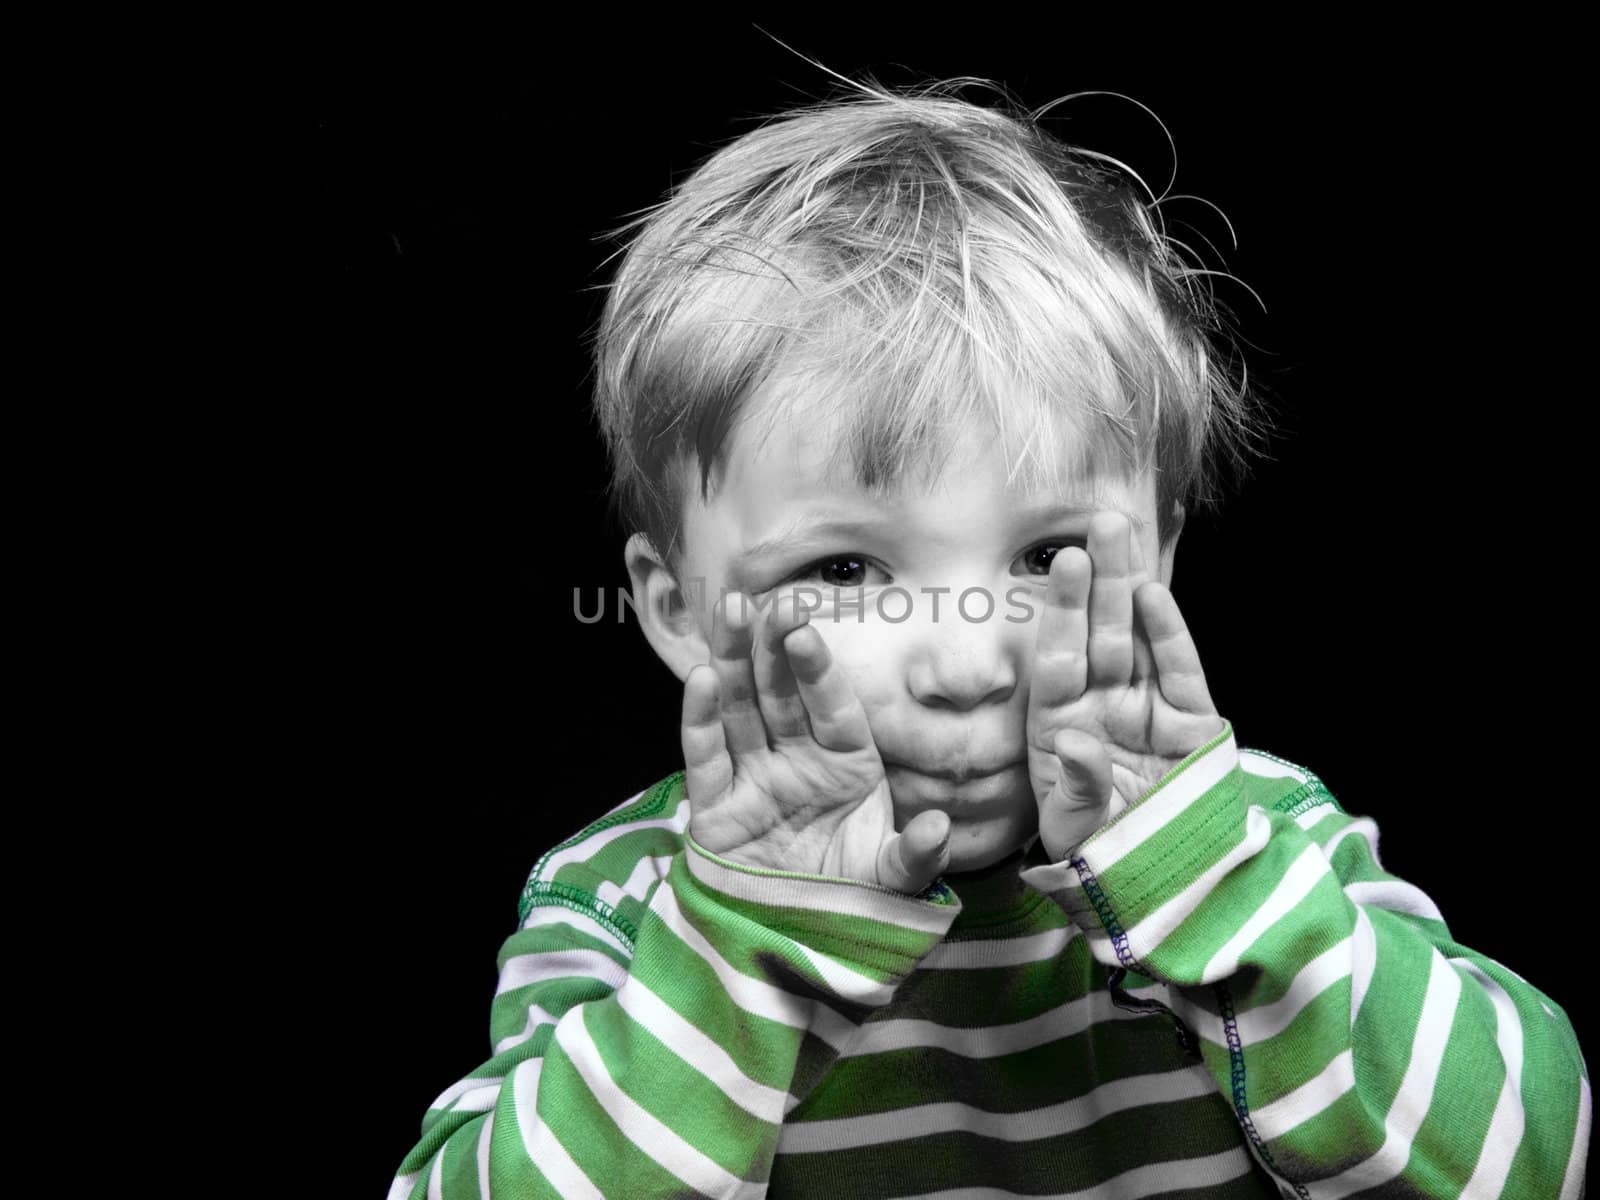 Litlle boy showing hands on black background, monochrome picture with only color green